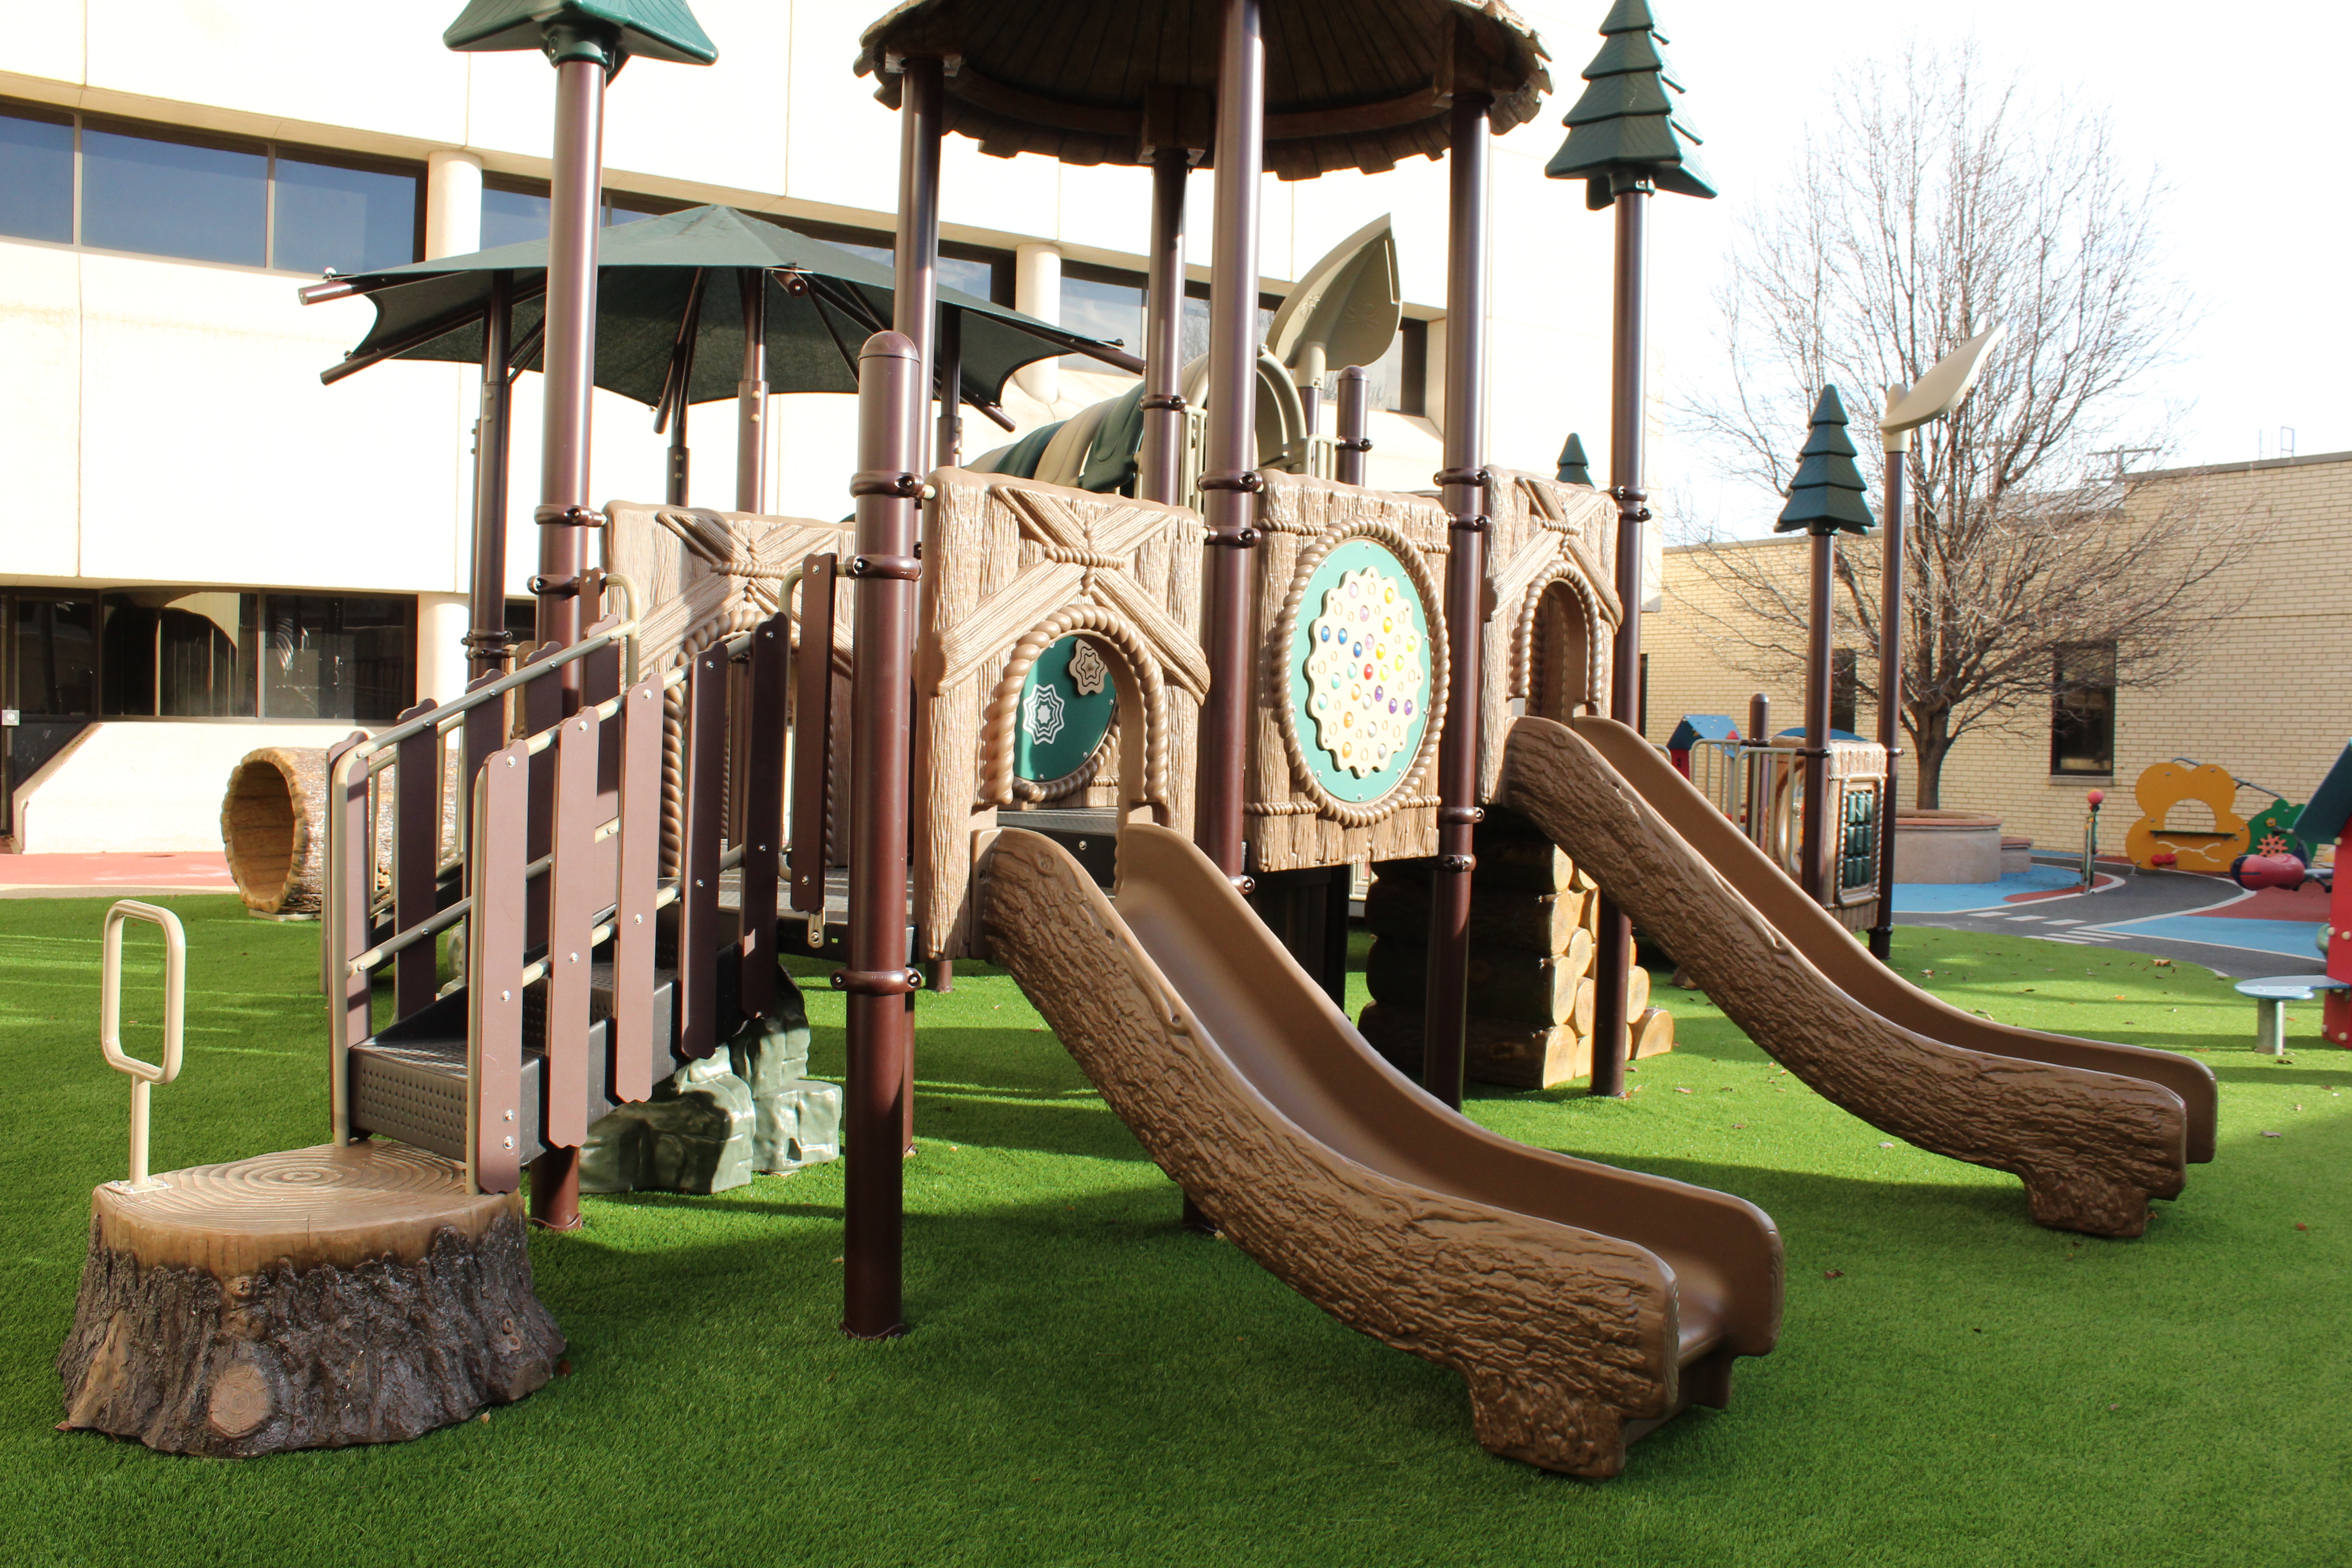 A side view of the playground that shows the built in slides.